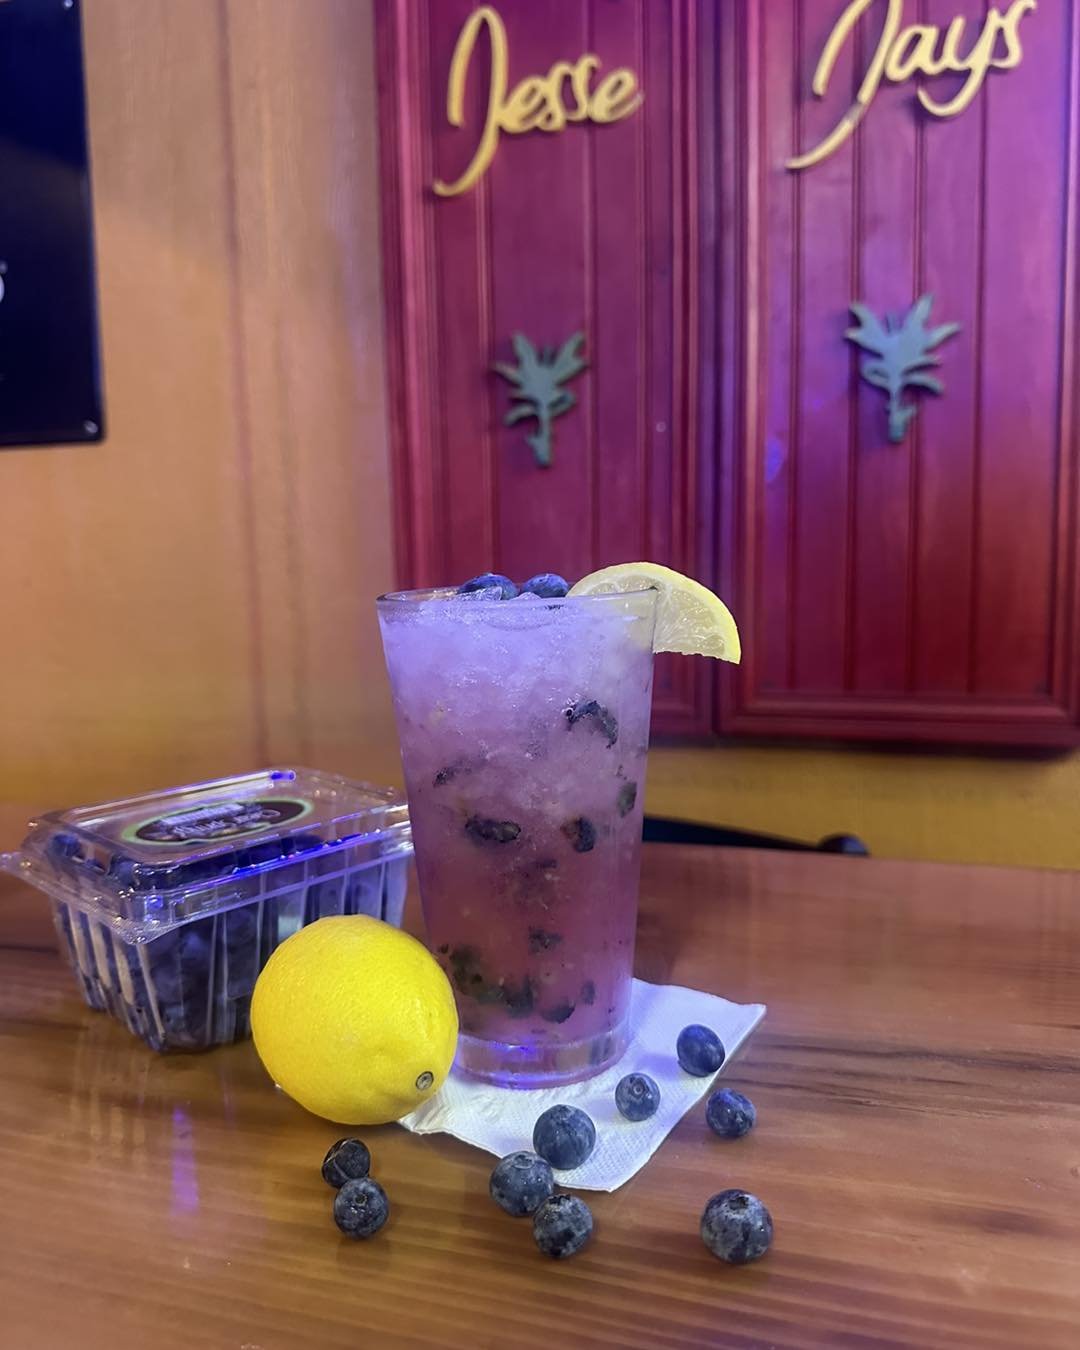 🍹✨ It's the weekend, and our fabulous bartender Jamey has whipped up something special just for you! Introducing the Blueberry Crush &ndash; perfect for kicking off the weekend! Come and join us for a taste. Cheers! 🥂

#JesseJays #ElSwampo #Blueber